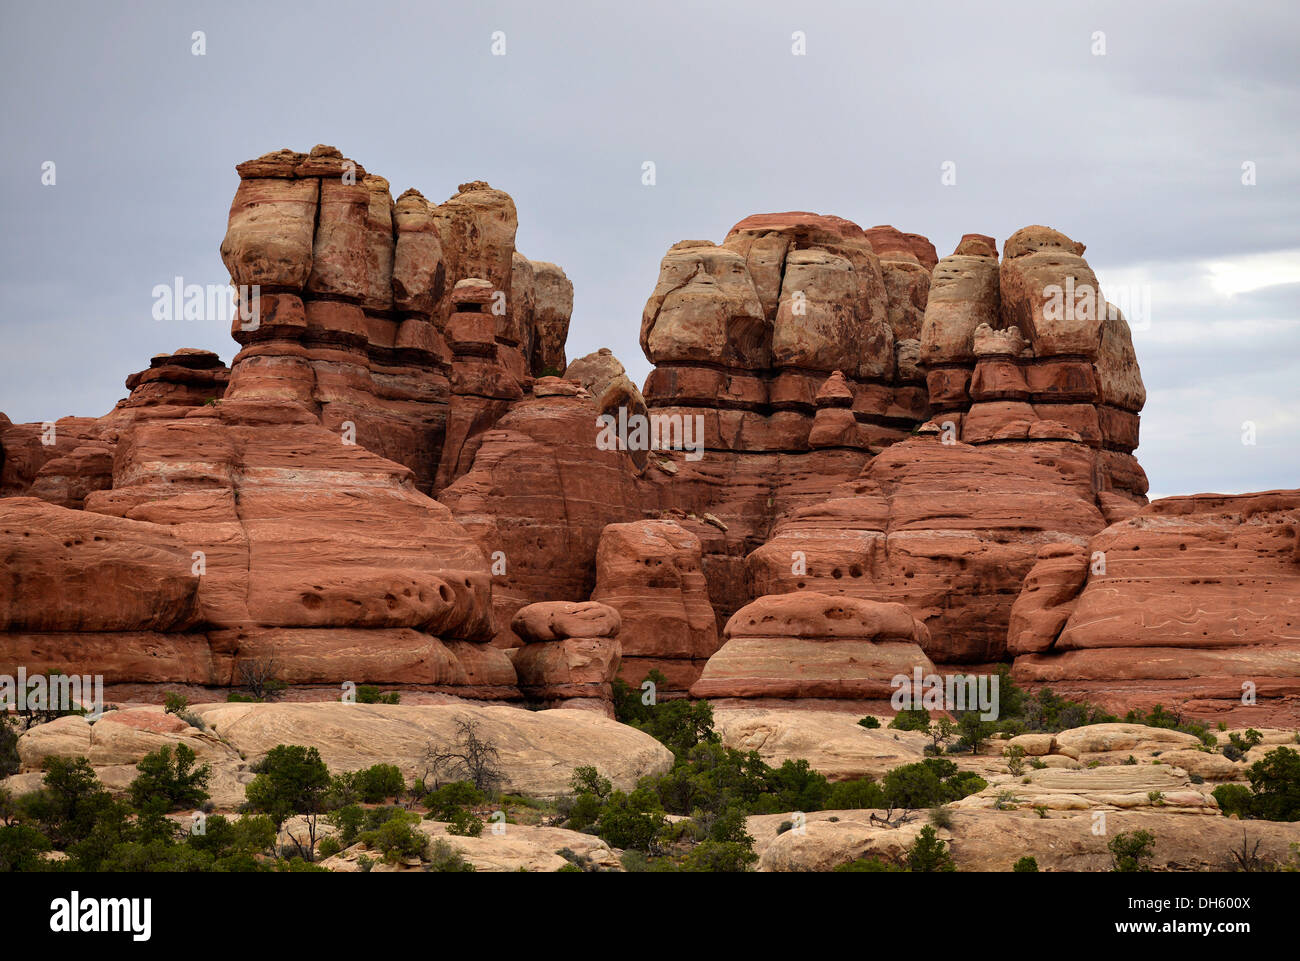 Elephant Hill rock formation, les aiguilles, District Canyonlands National Park, Utah, United States of America, USA Banque D'Images